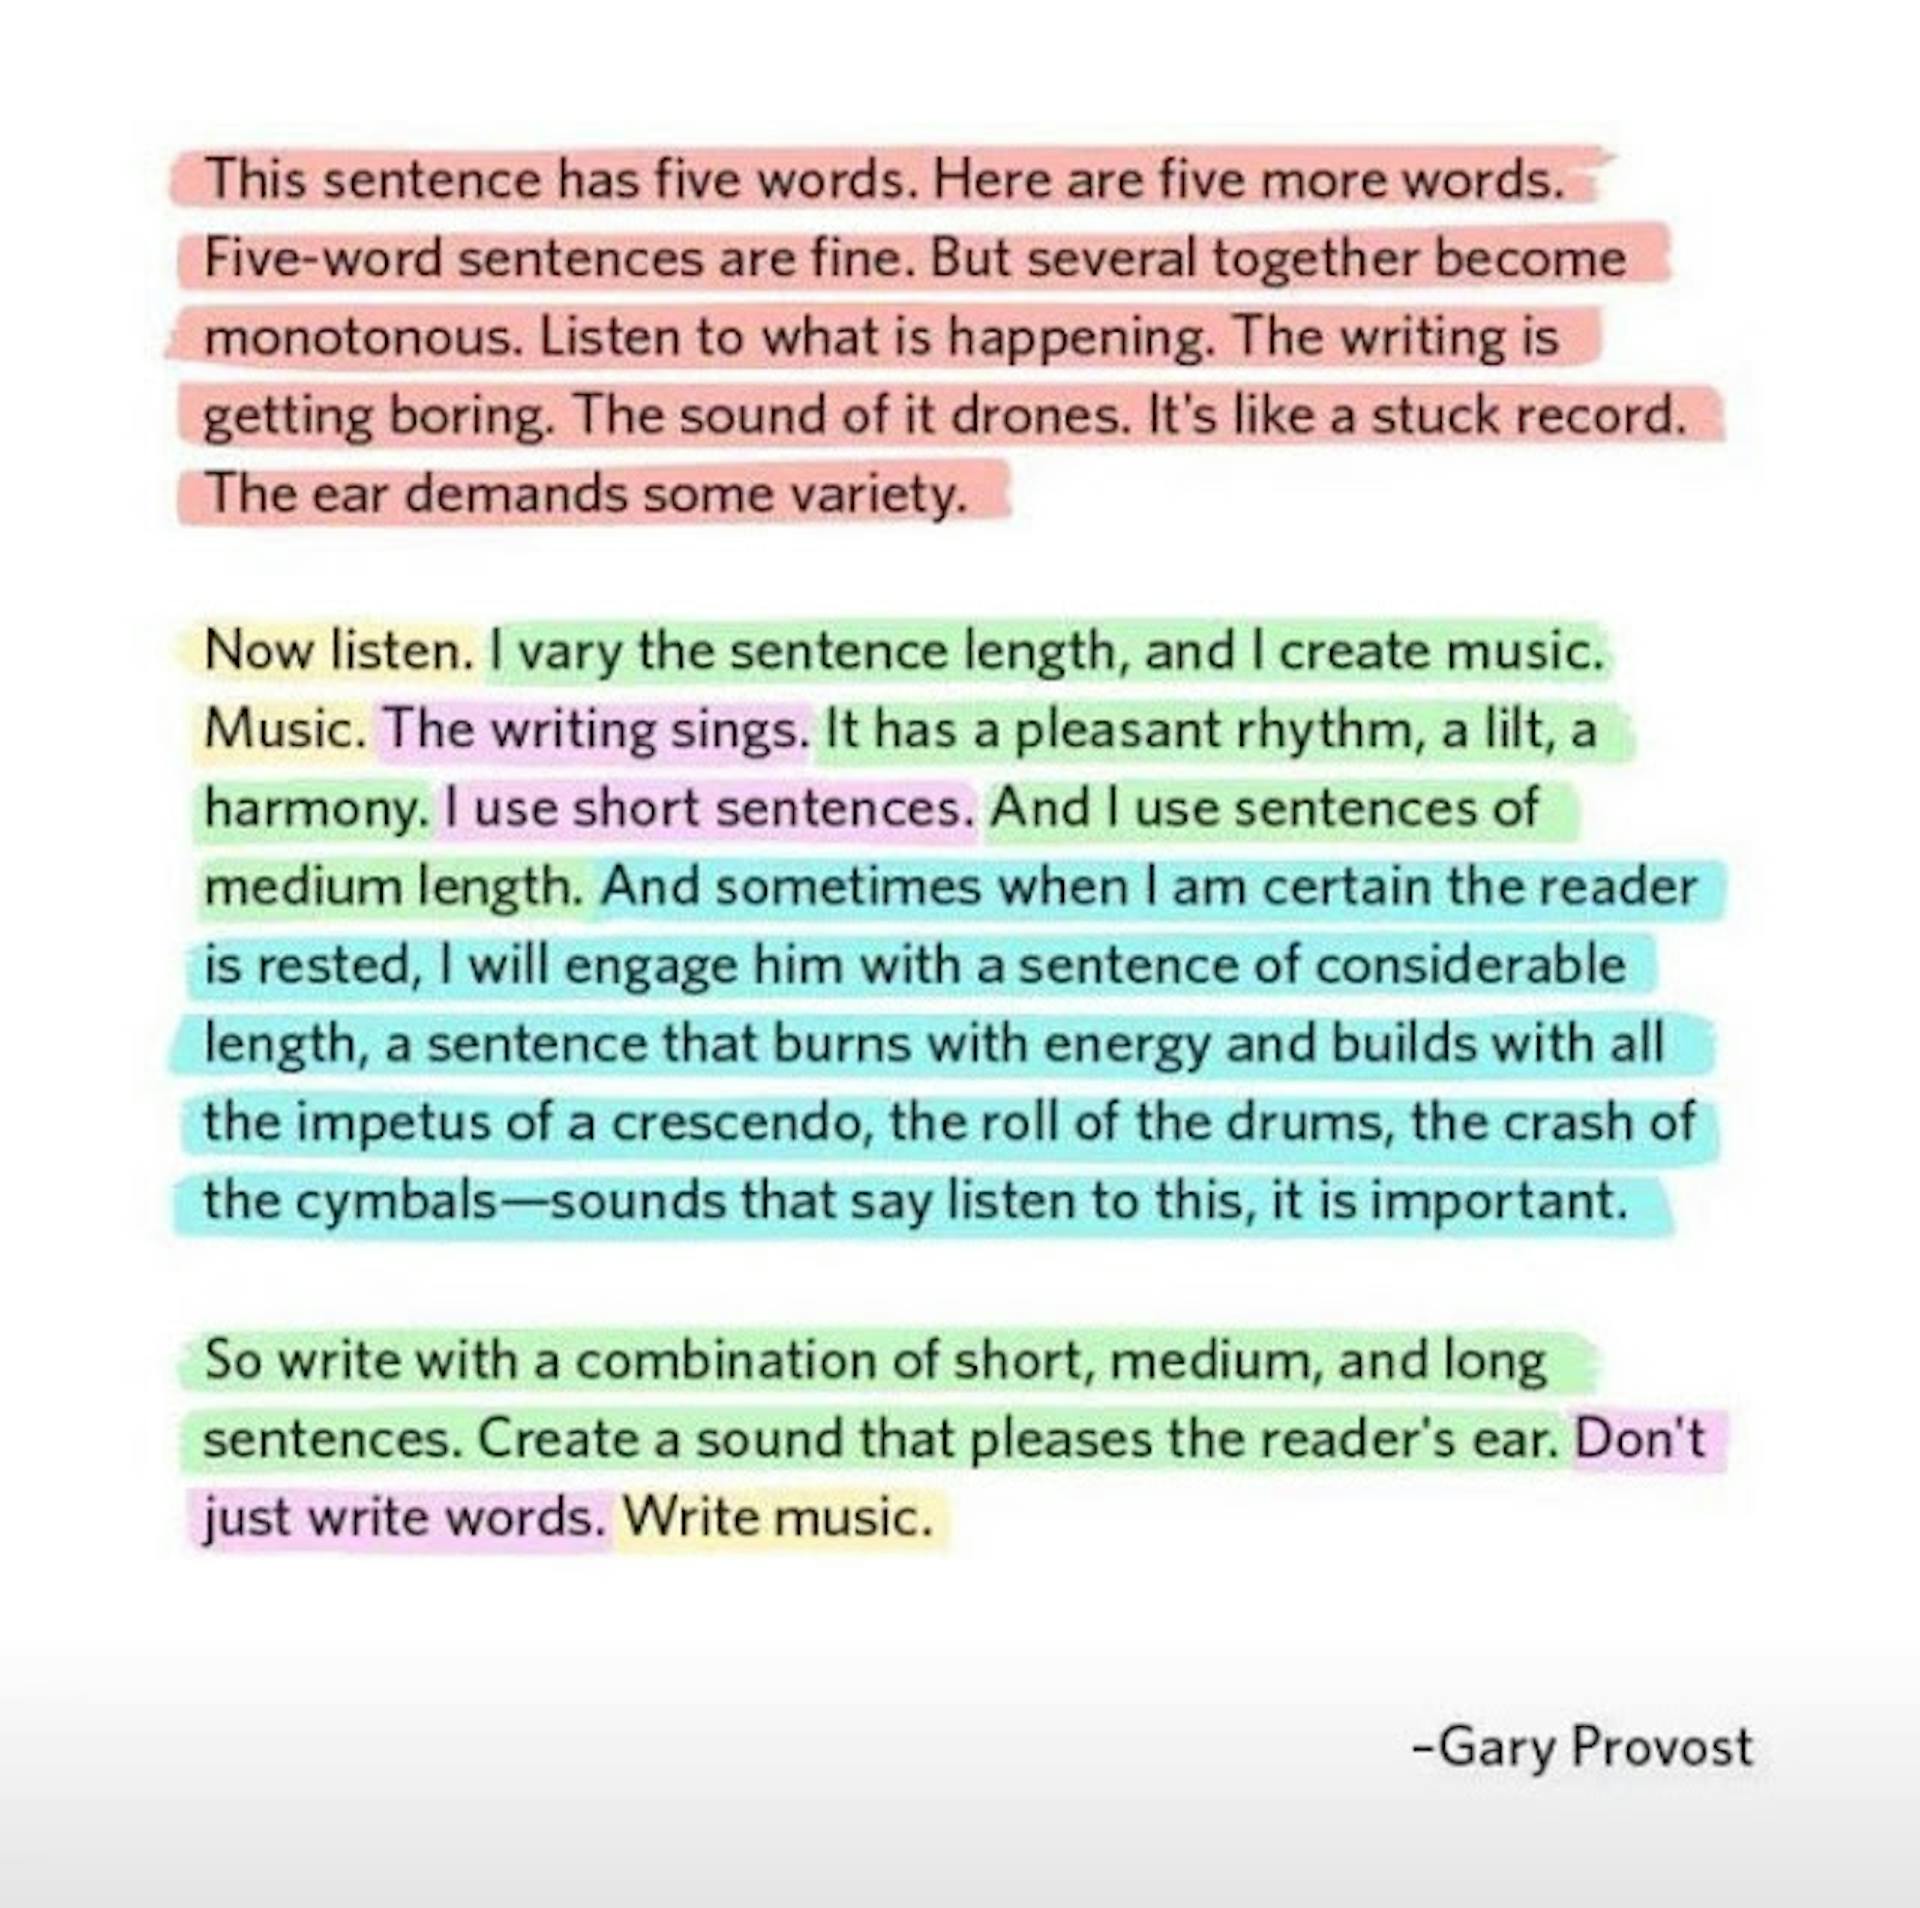 "Don’t just write words, write music" - Gary Provost